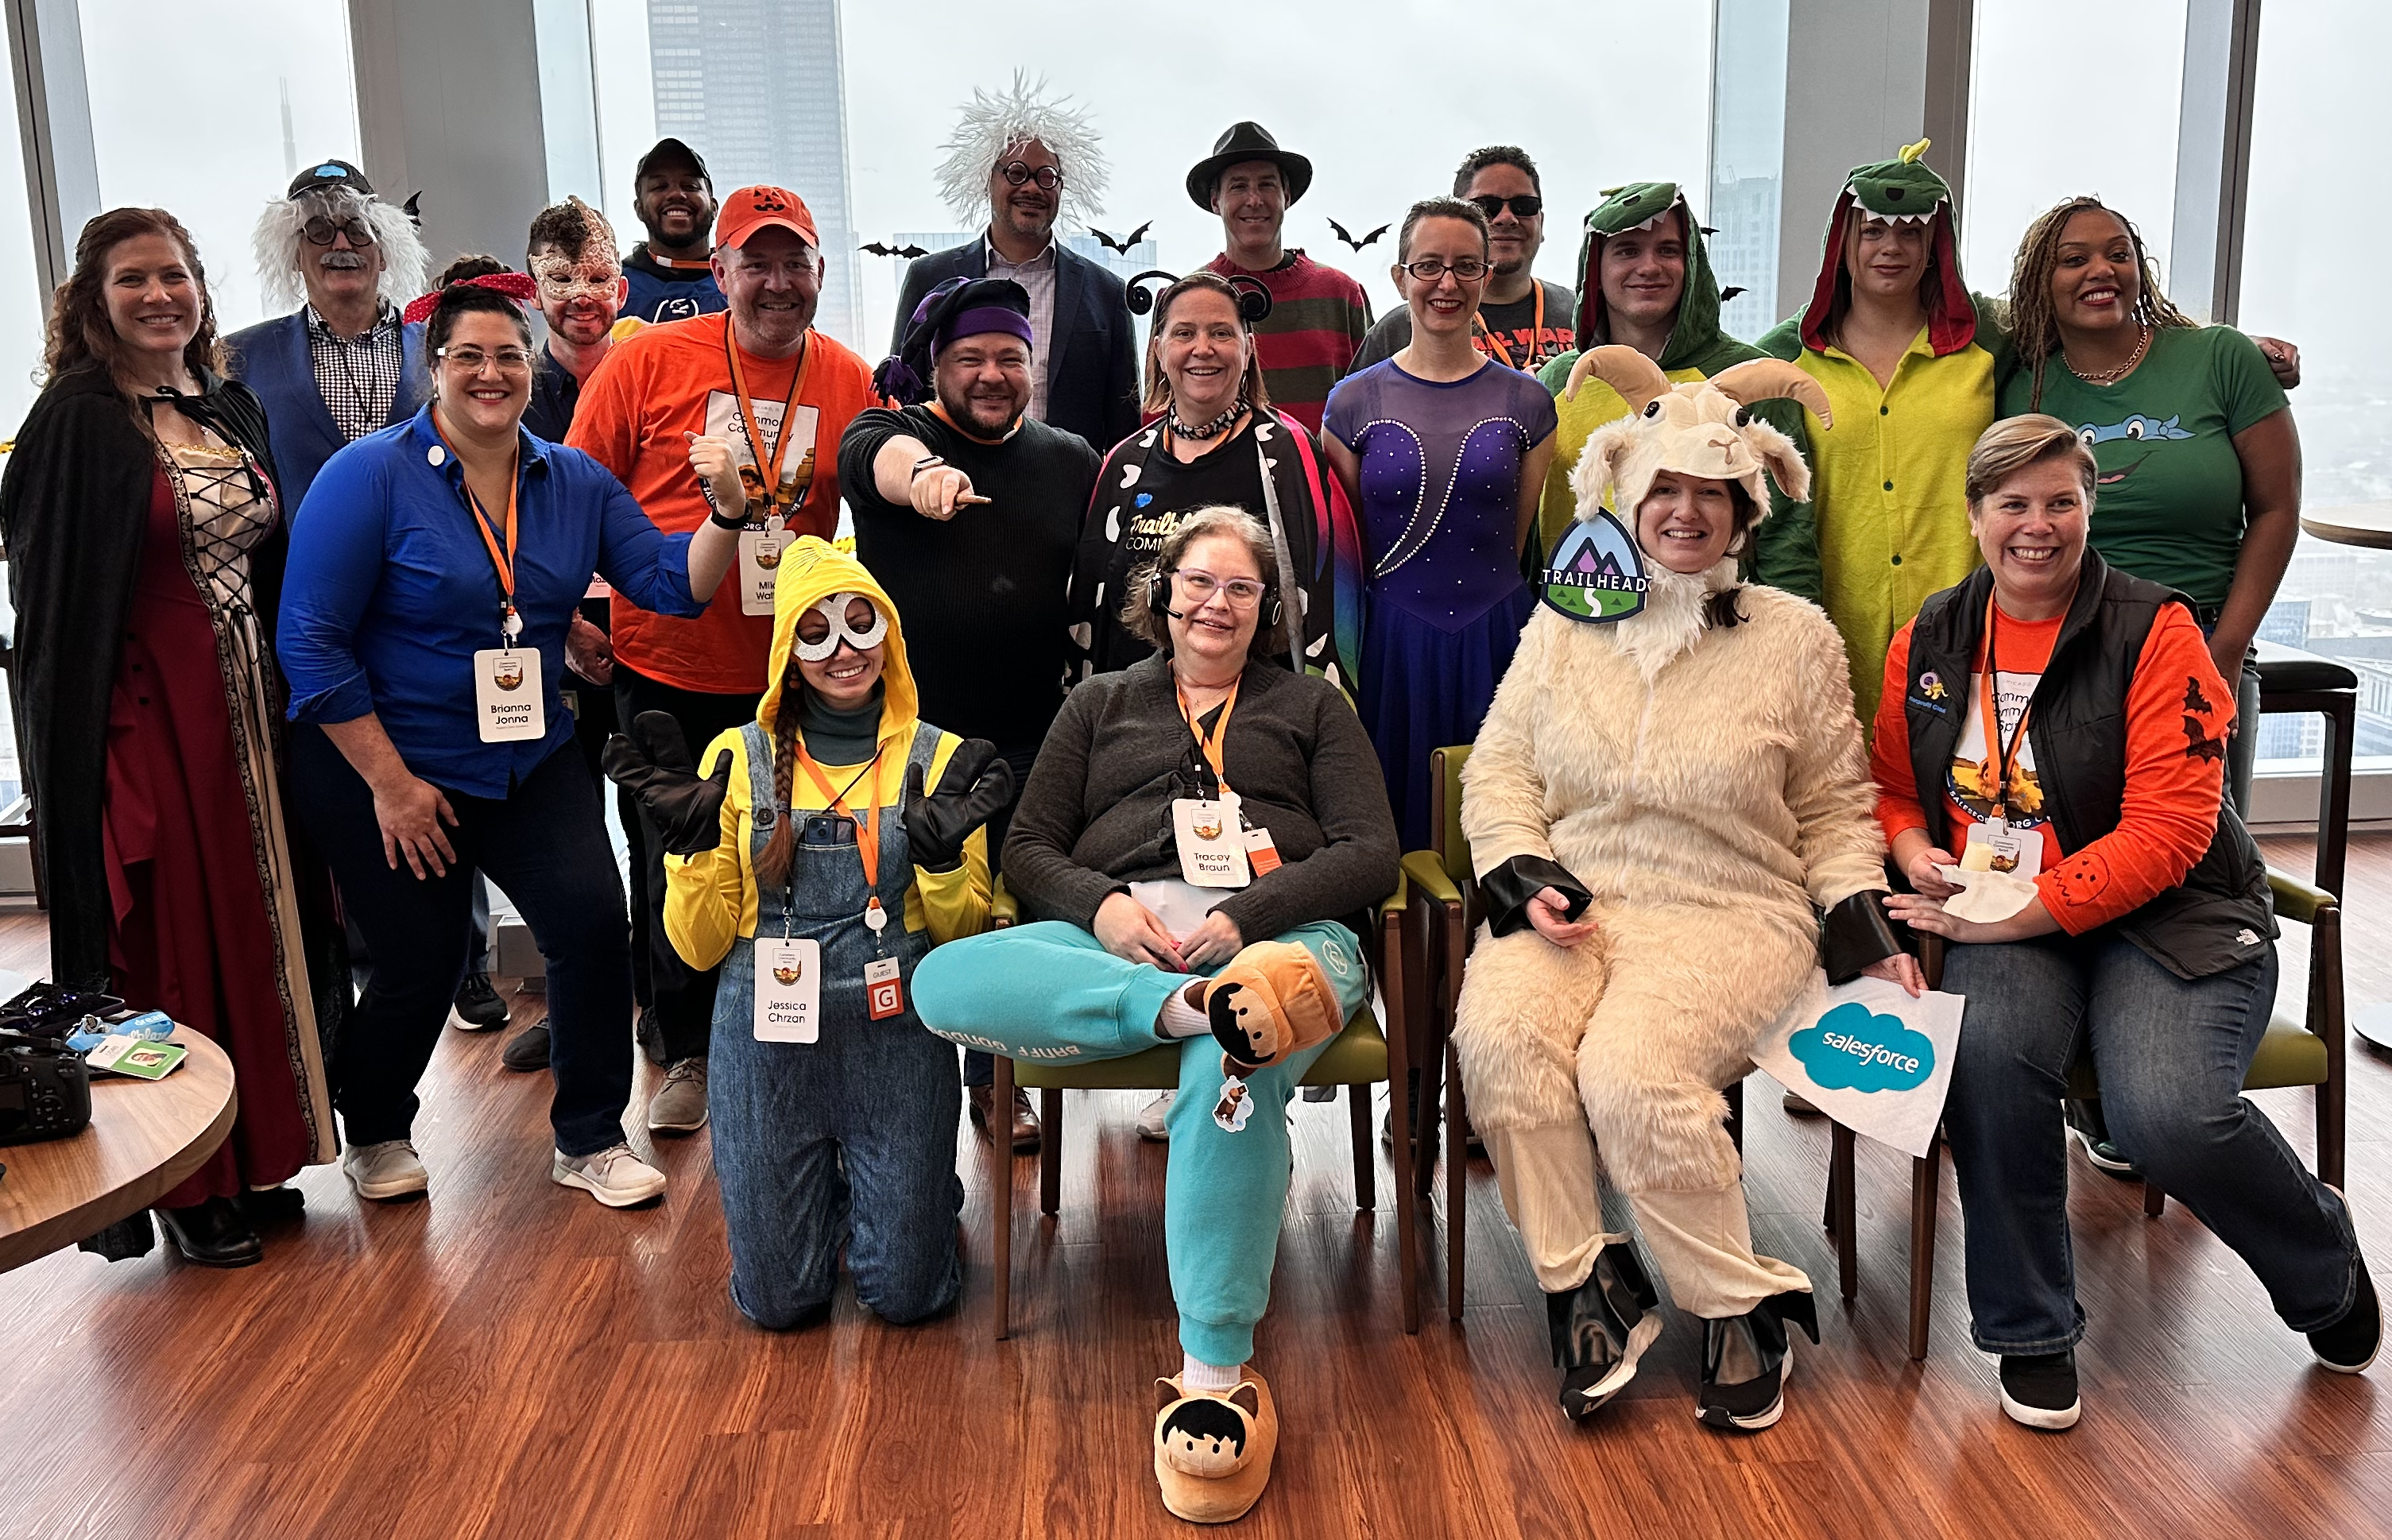 Group image of Chicago Sprint event attendees who wore a halloween costume.